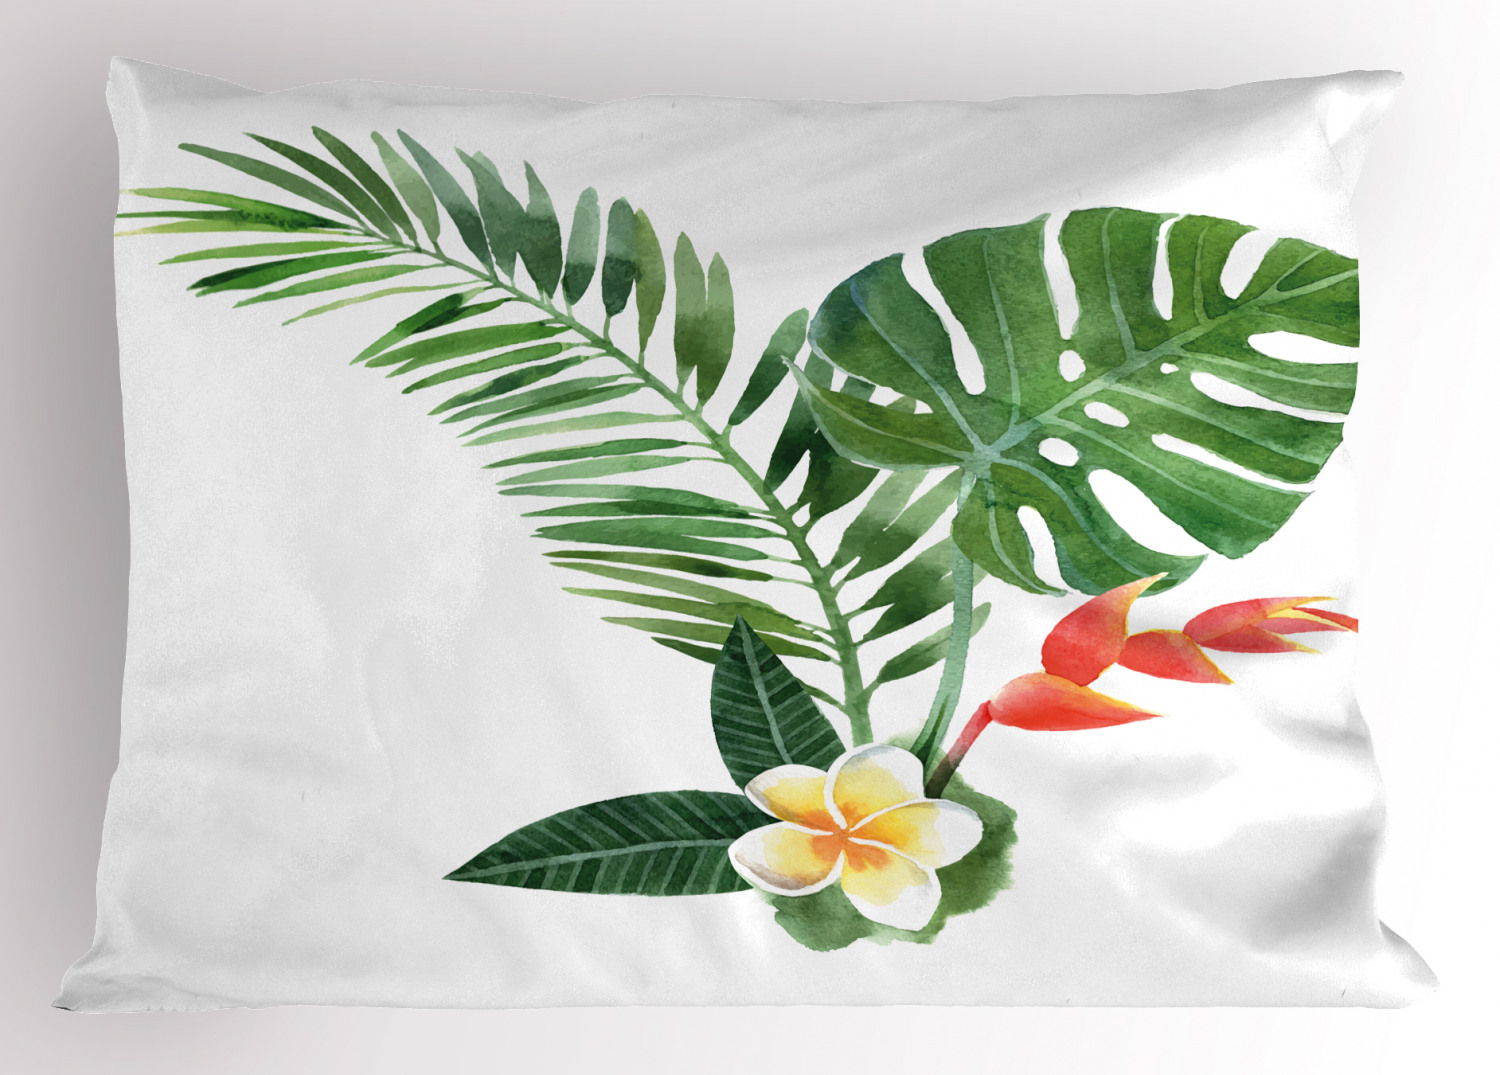 Plant Pillow Sham Beautiful Frangipani Blooming on Tropical Fern Exotic Art Watercolor, Decorative Standard Queen Size Printed Pillowcase, 30 X 20 Inches, Scarlet Fern Green Marigold, by Ambesonne - image 1 of 2